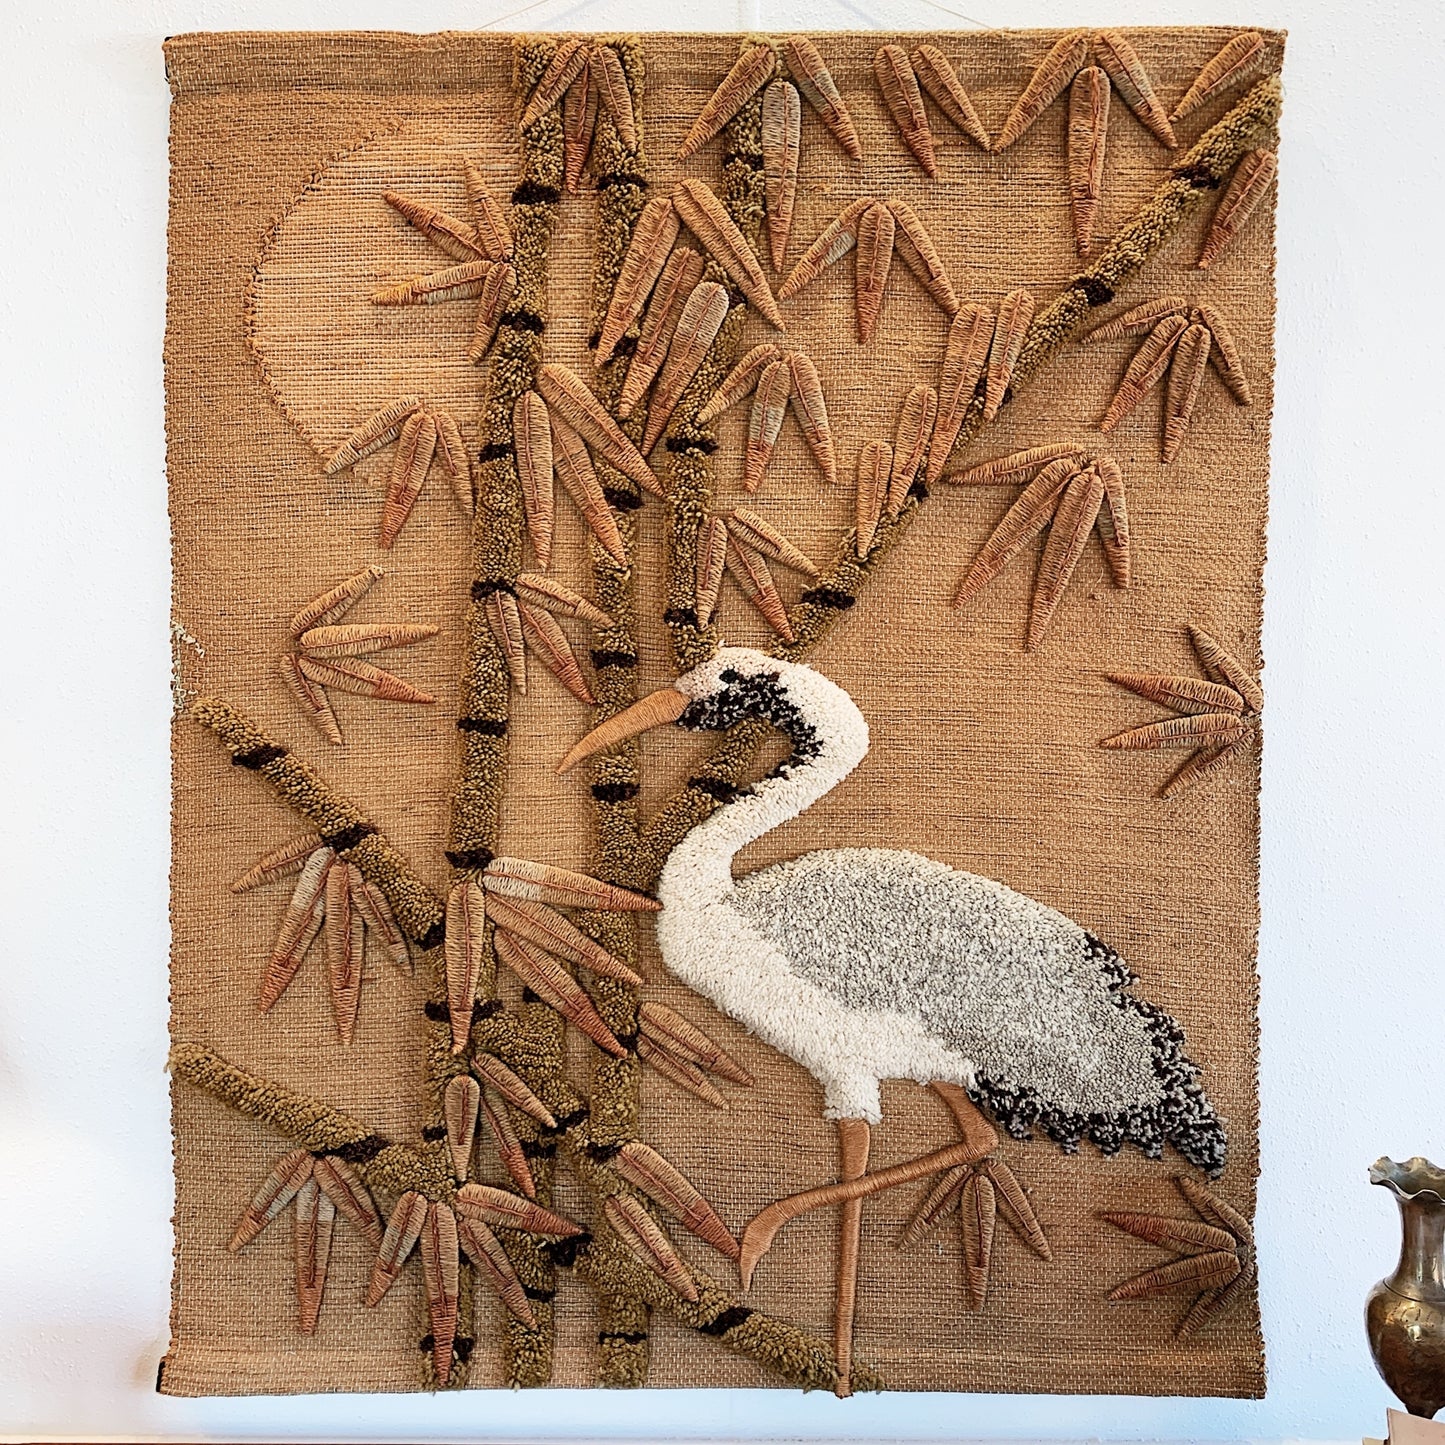 Bamboo Forest Crane Jute Wall Hanging